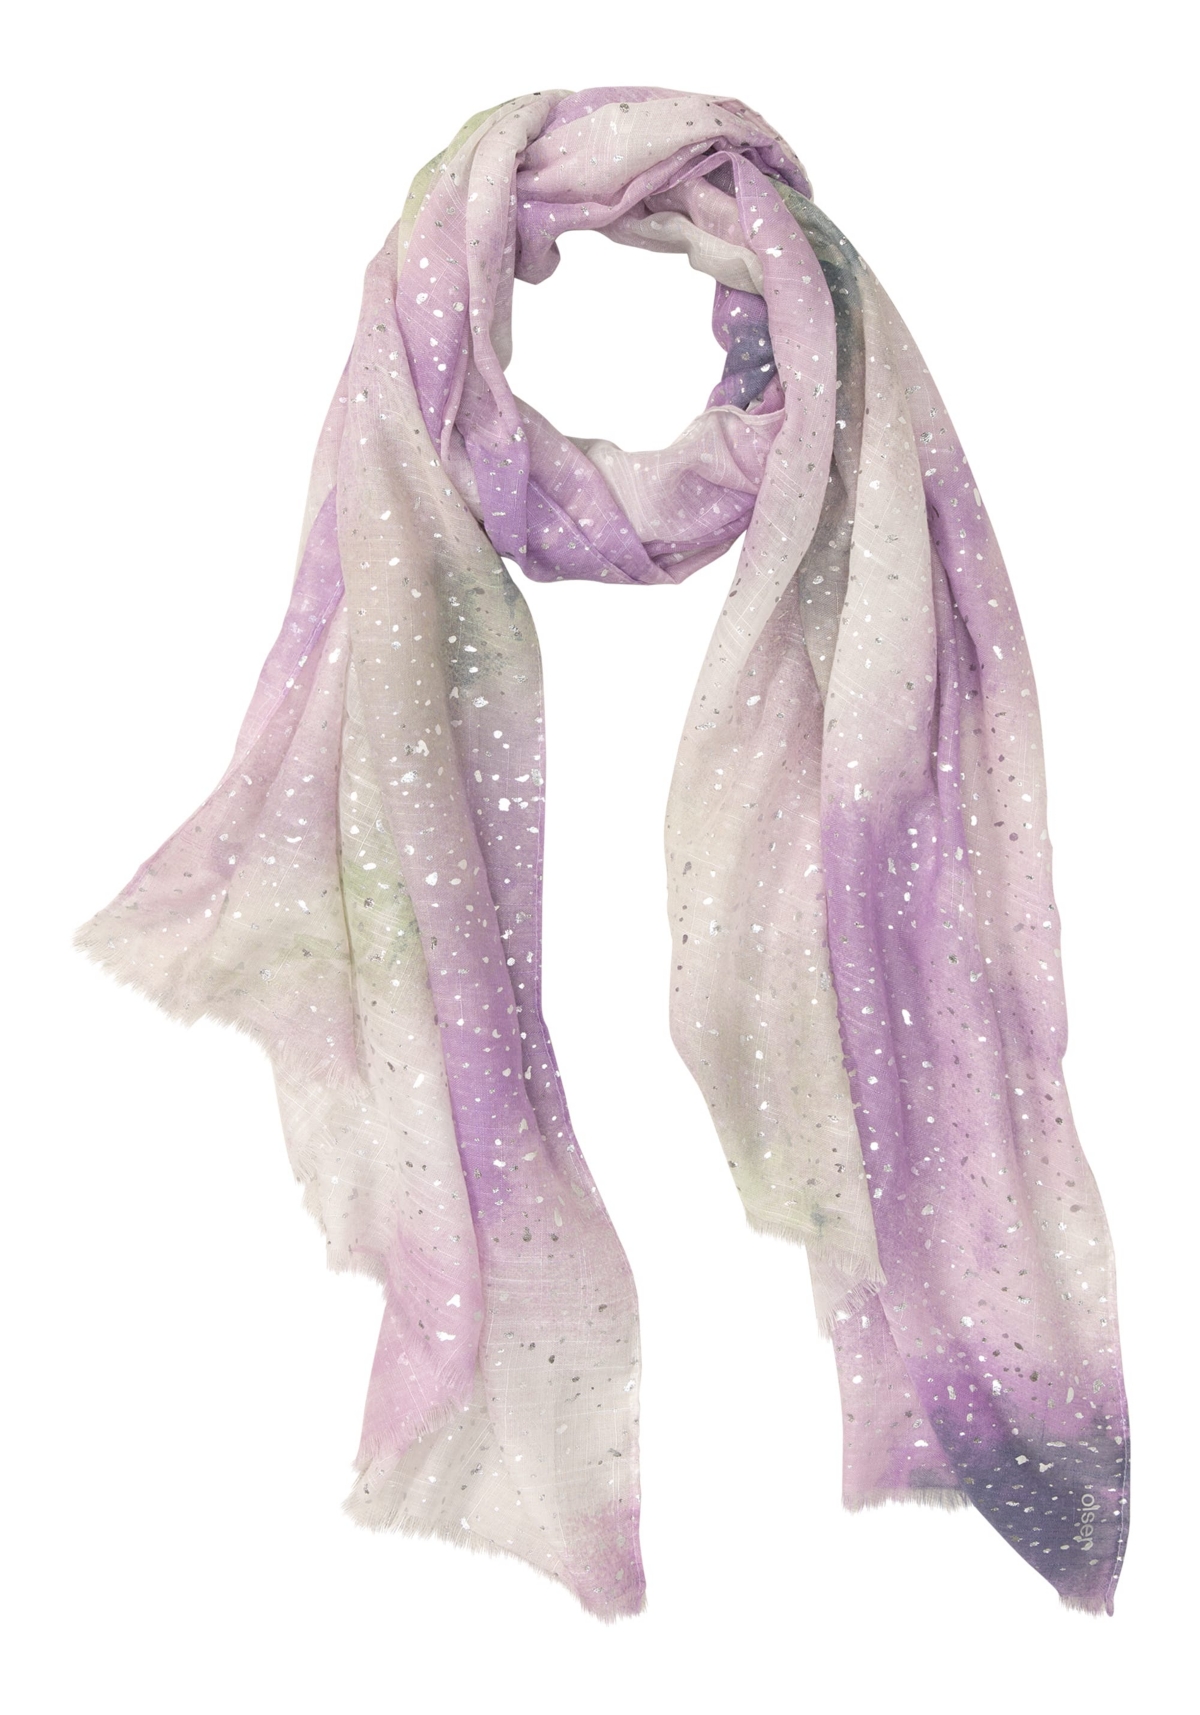 Watercolor & Foil Print Scarf with Frayed Edge Scarf - Soft lilac